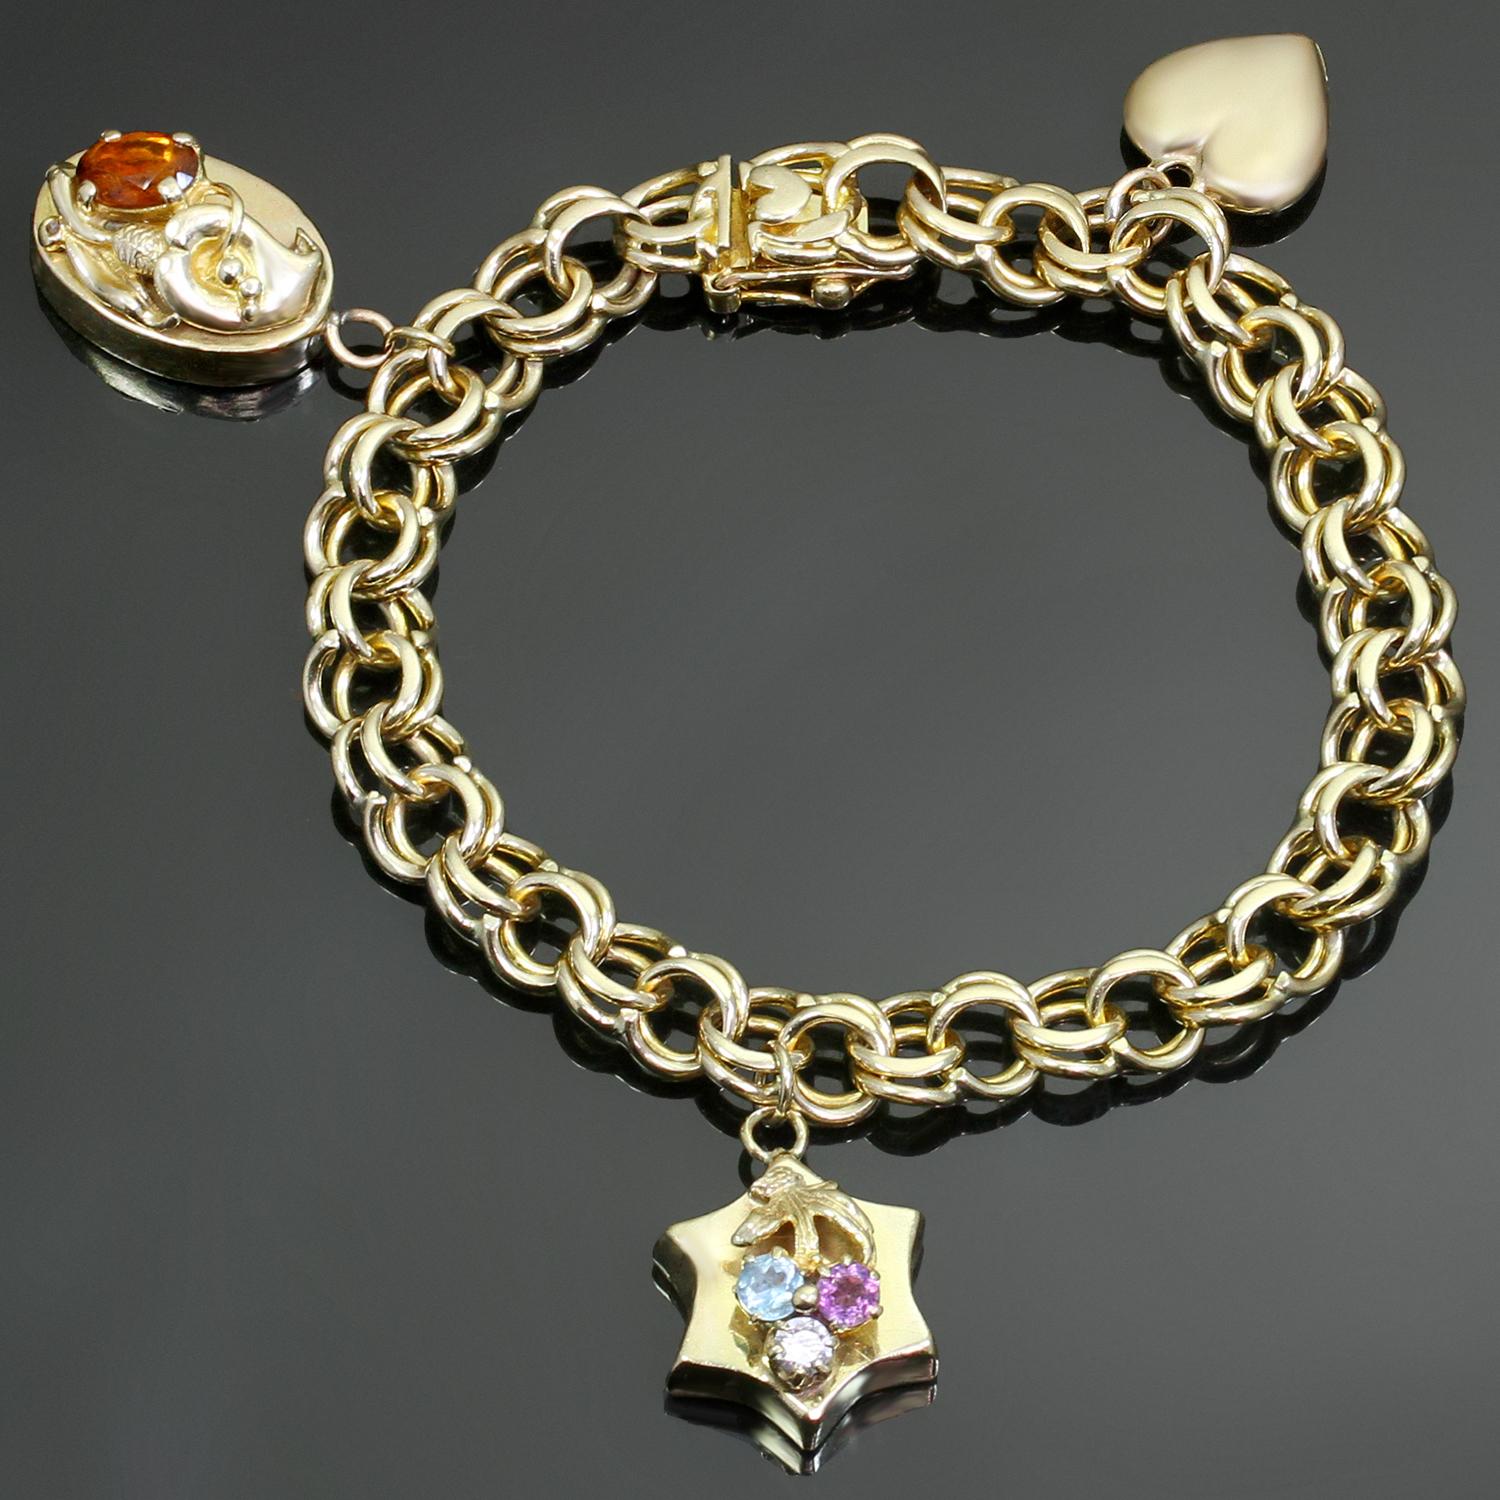 This classic vintage link bracelet is crafted in 14k yellow gold and features 3 charms - a heart charm (with some dents and fine scratches), a star charm prong-set with 3 faceted gemstones, and an oval charm prong-set with a yellow-orange citrine.